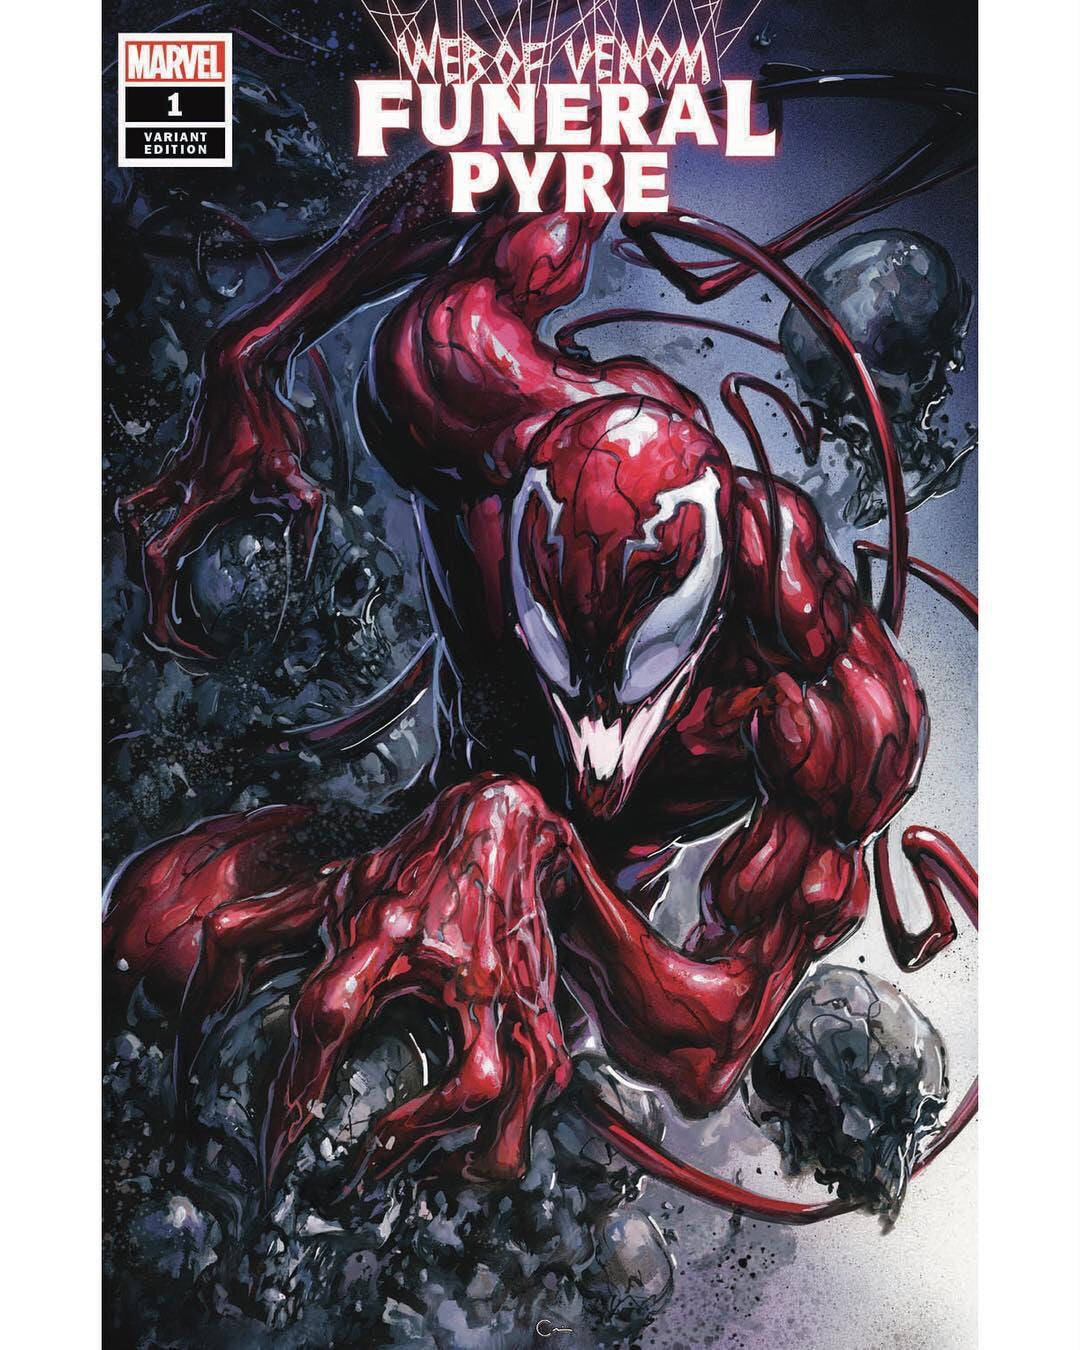 WEB OF VENOM FUNERAL PYRE #1 CLAYTON CRAIN EXCLUSIVE VARIANTS OPTIONS